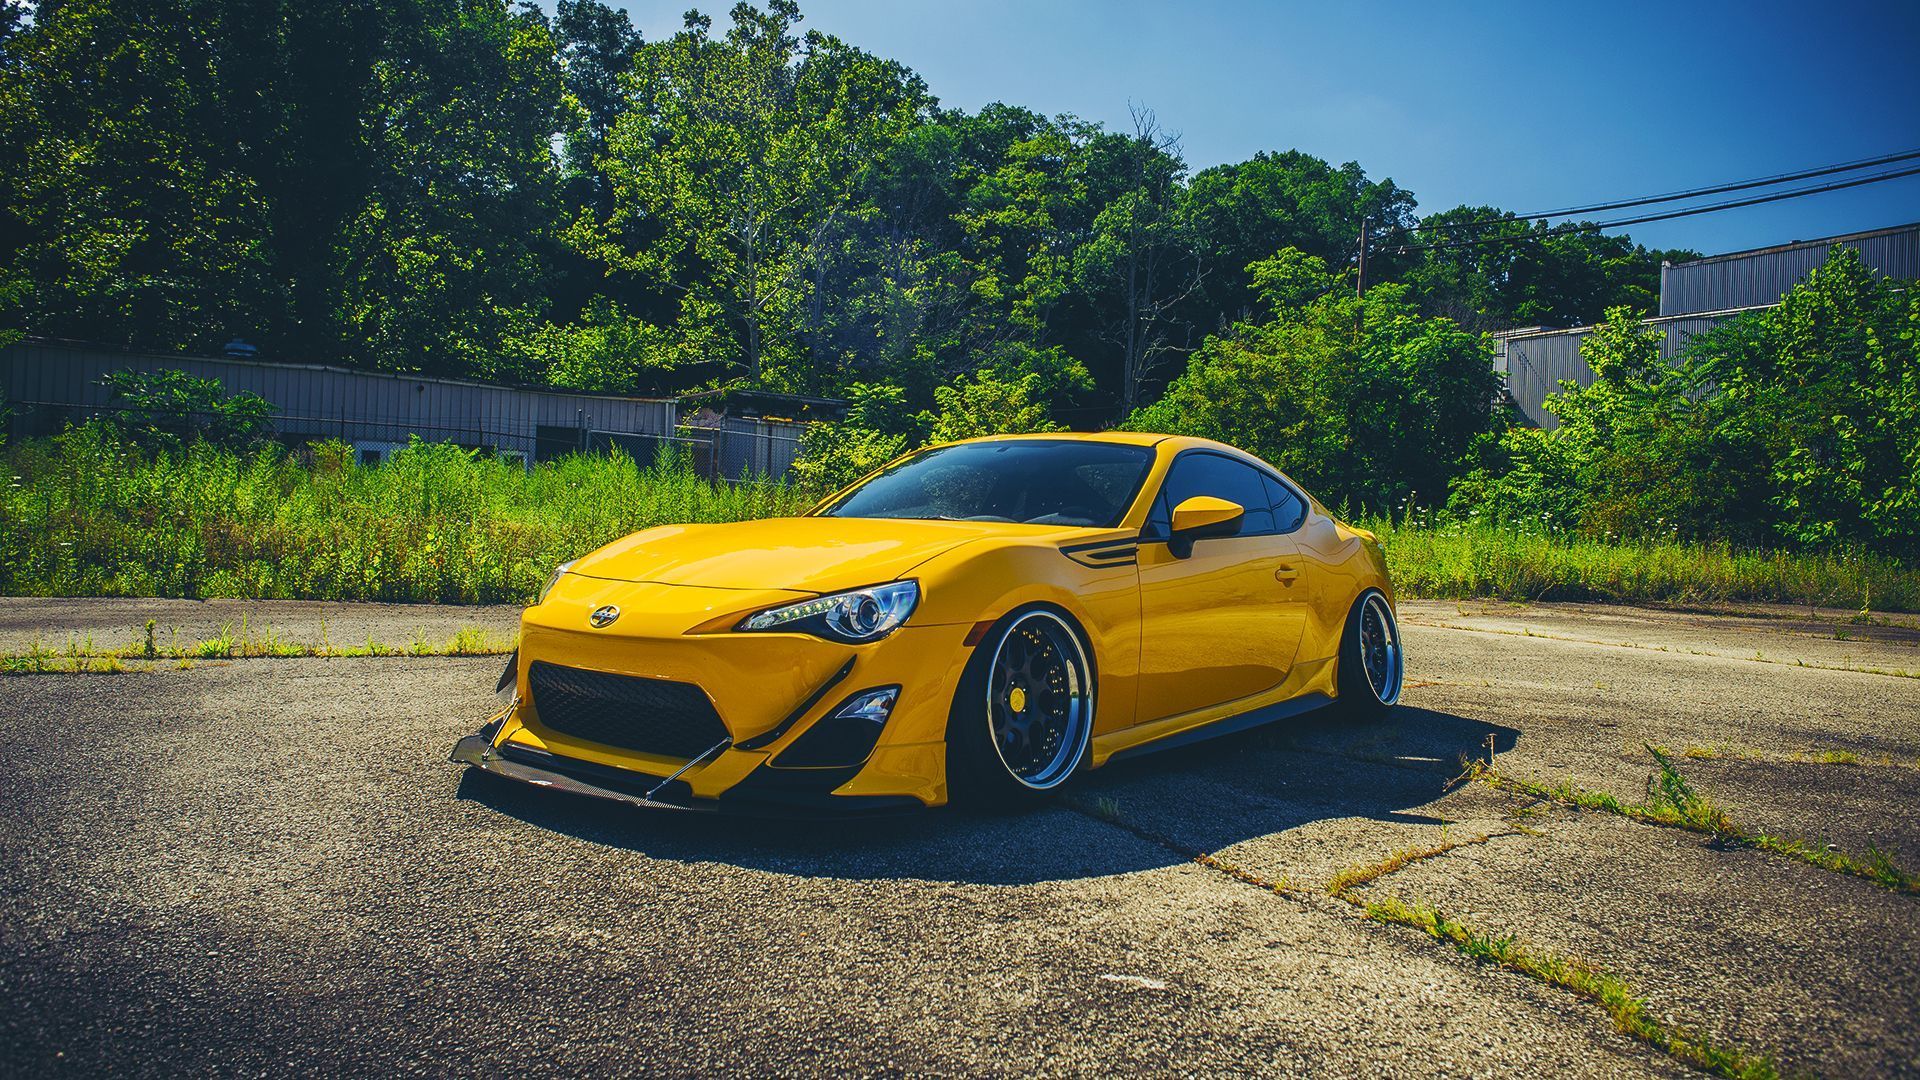 Scion FRS Stance Wallpaper | HD Car Wallpapers